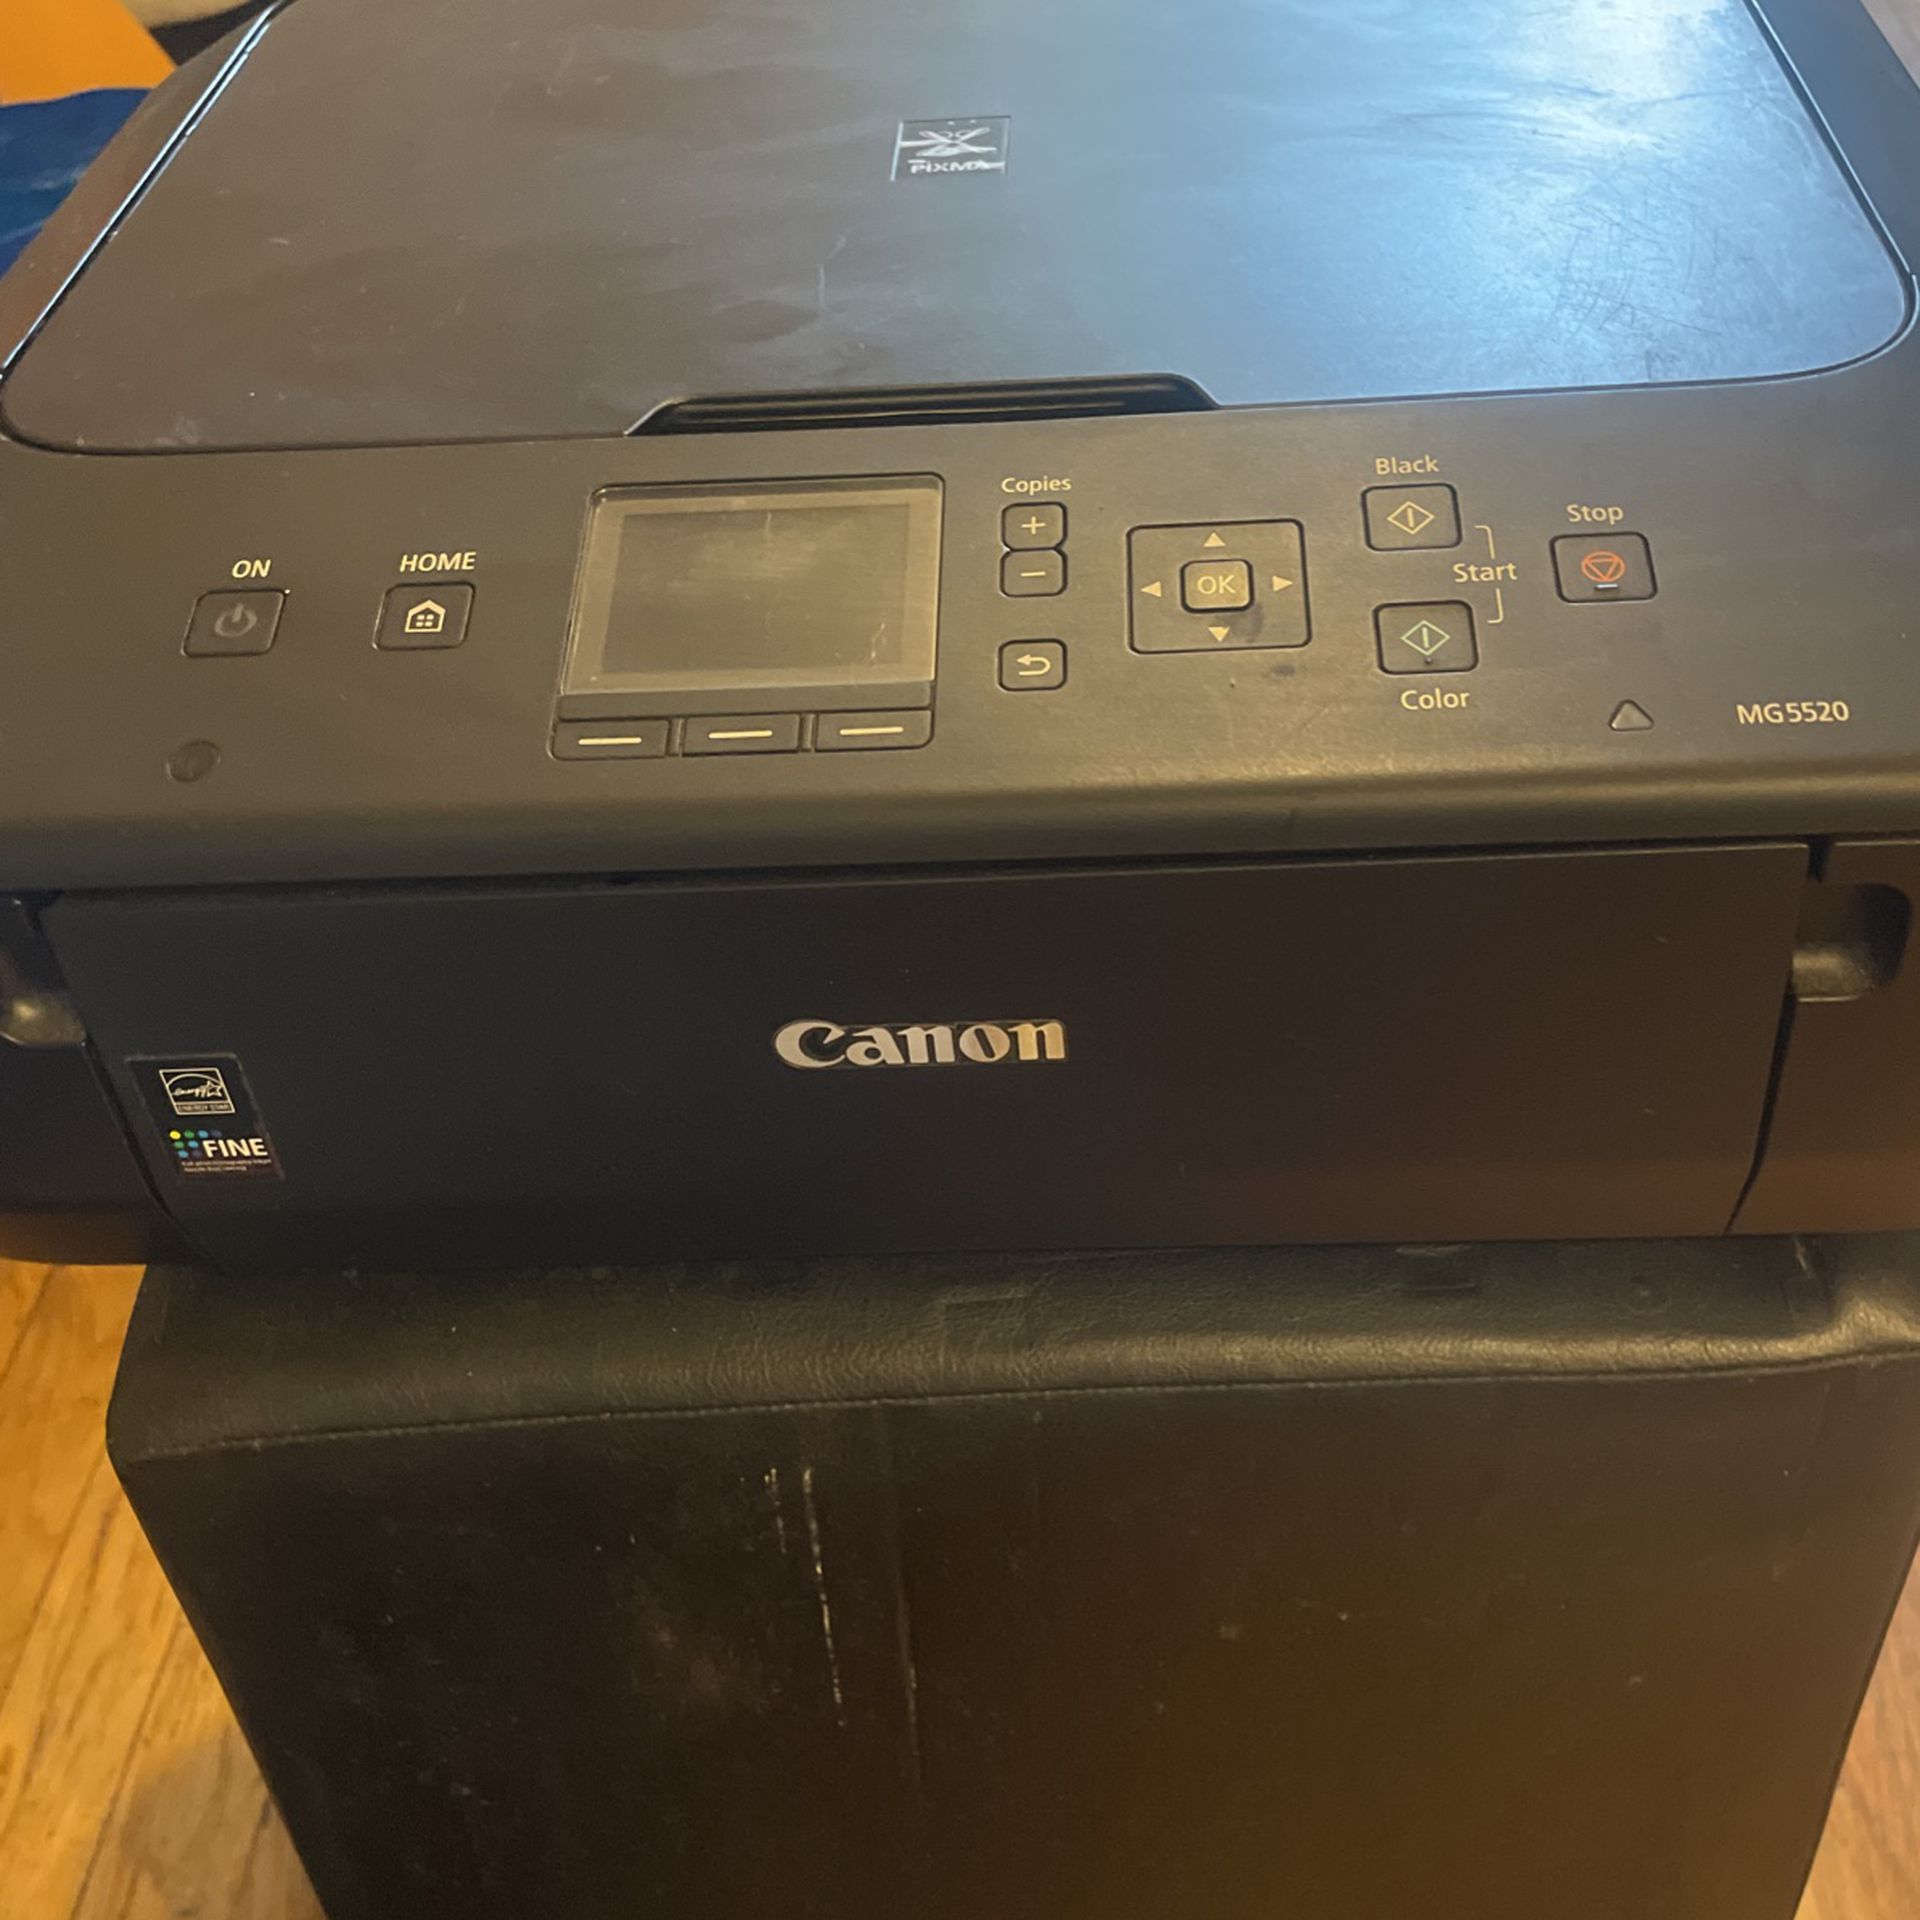 eftertiden minus udskille Canon Printer MG5220 for Sale in Brooklyn, NY - OfferUp